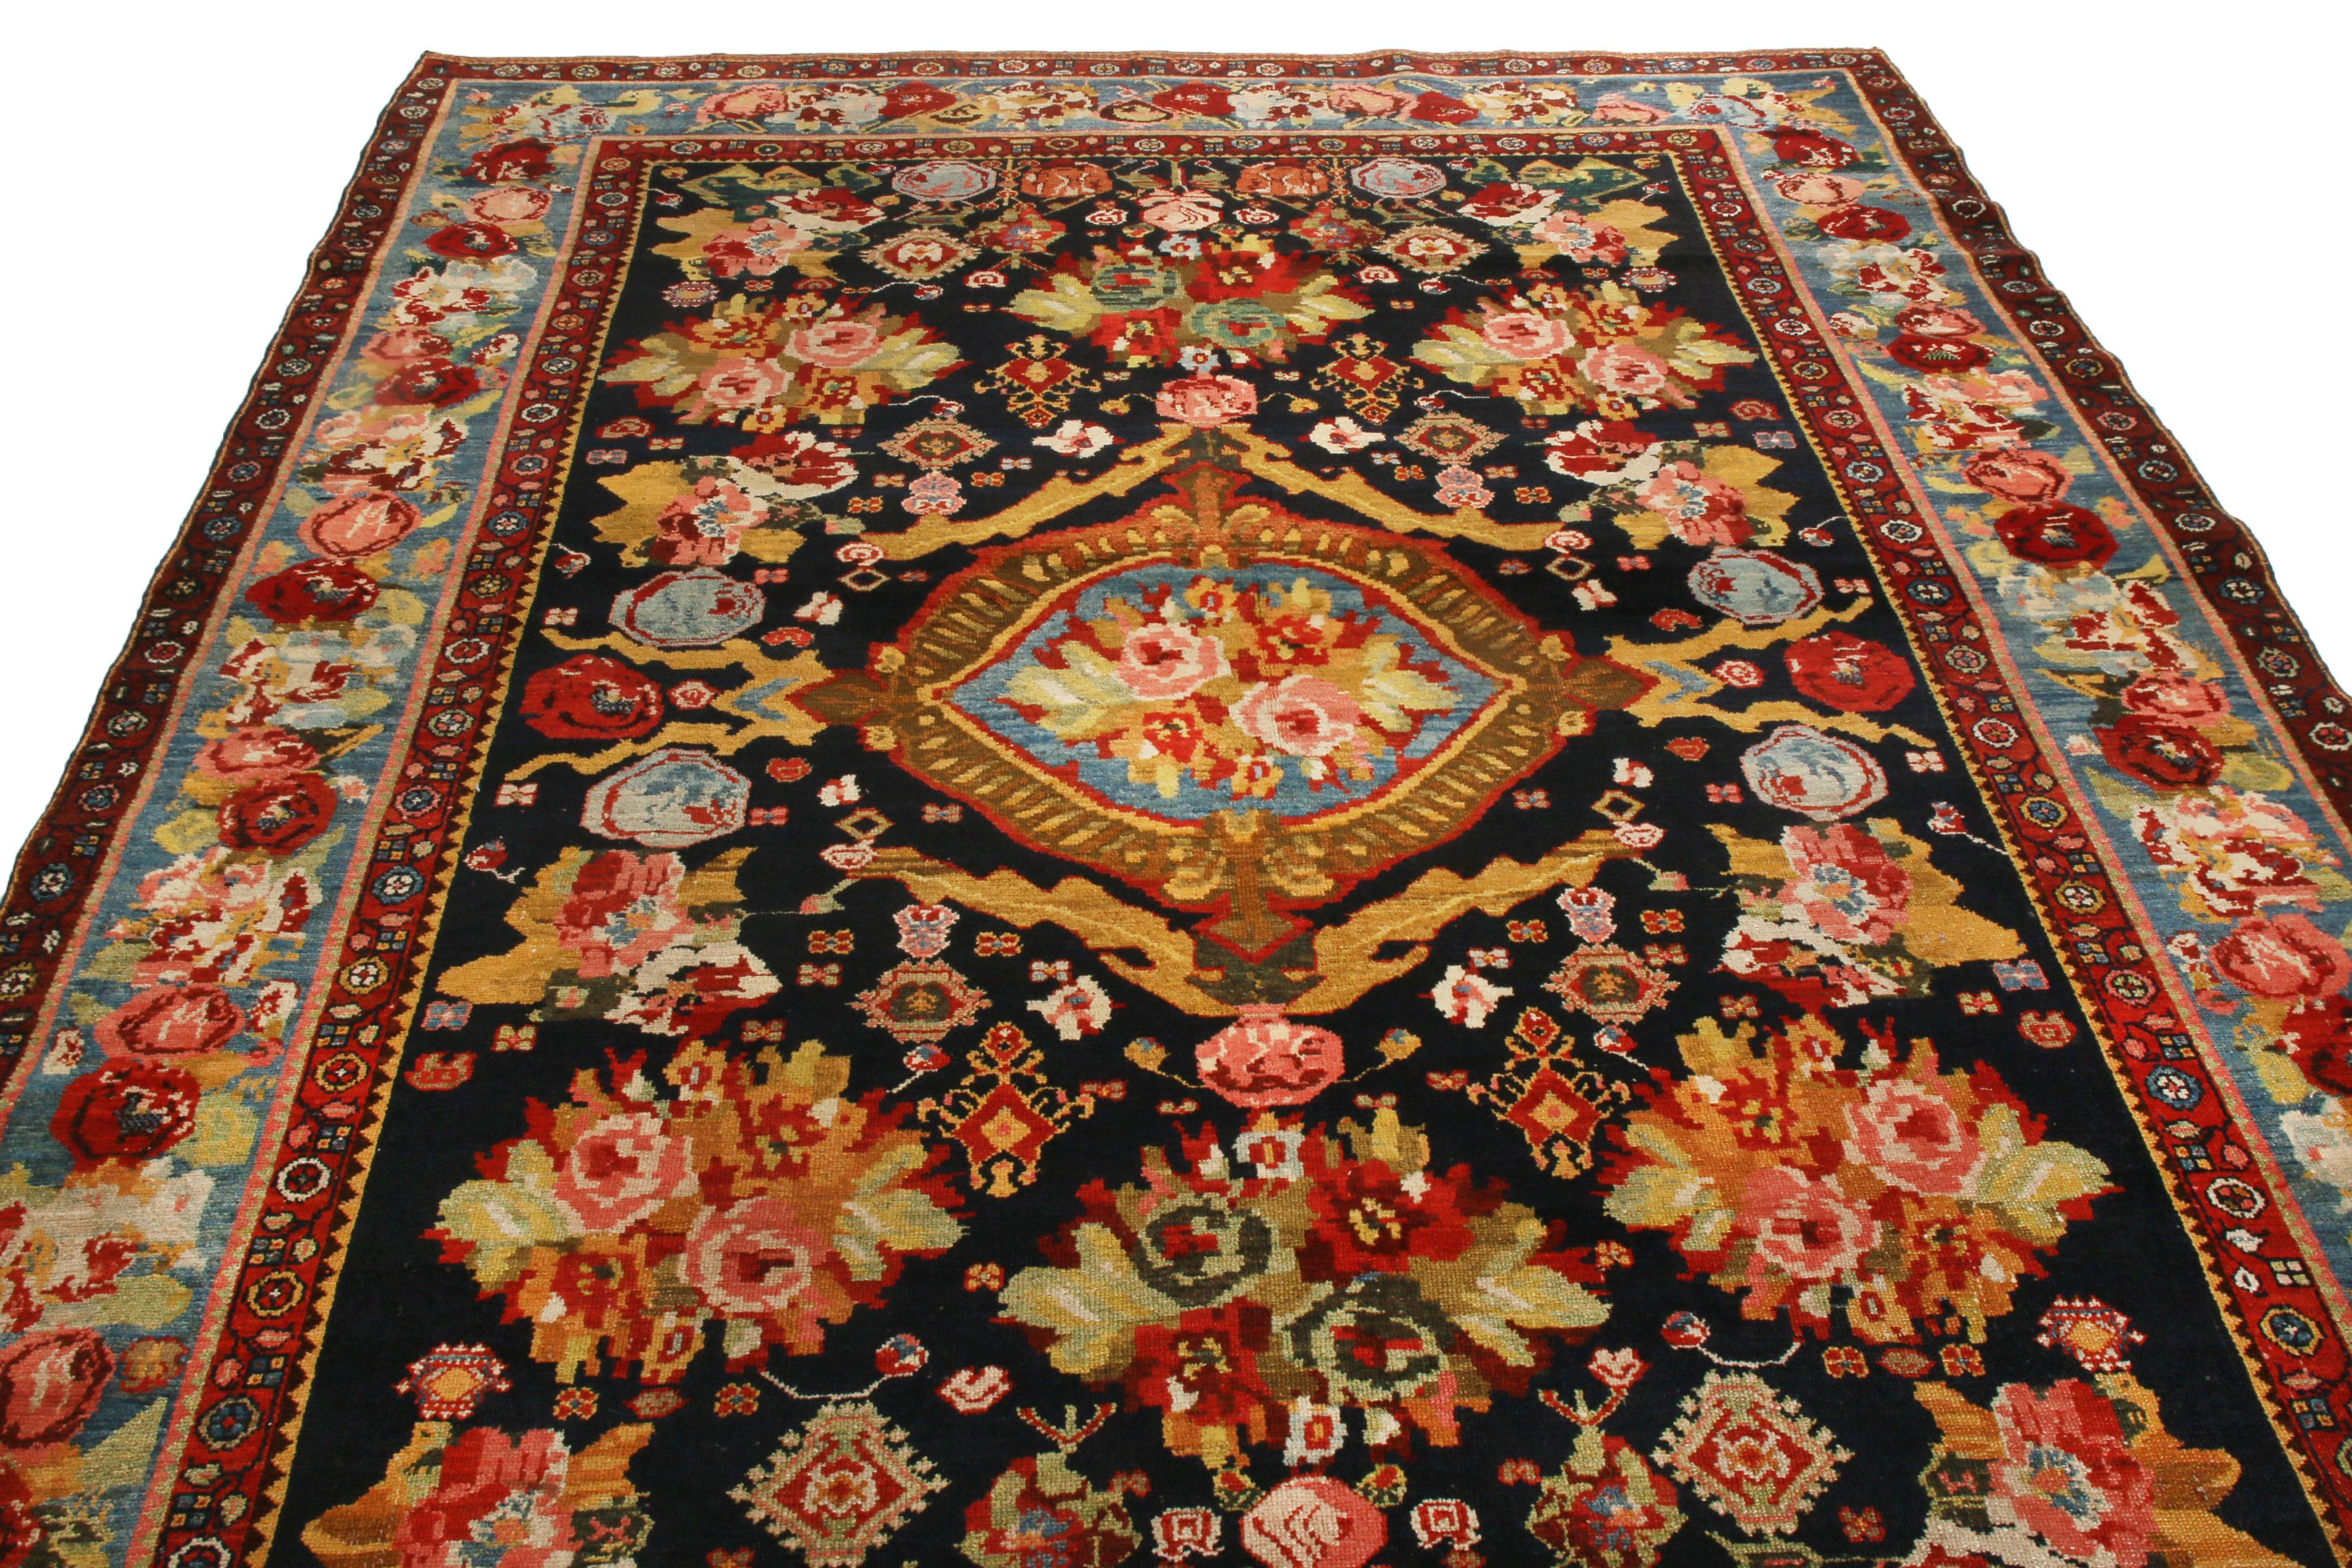 Originating from Persia between 1890-1900, this antique traditional Bakhtiari Persian rug features an exceptionally individualistic repetition of distinct floral imagery in rich and varied colourways. Hand knotted in high quality wool, the mirrored